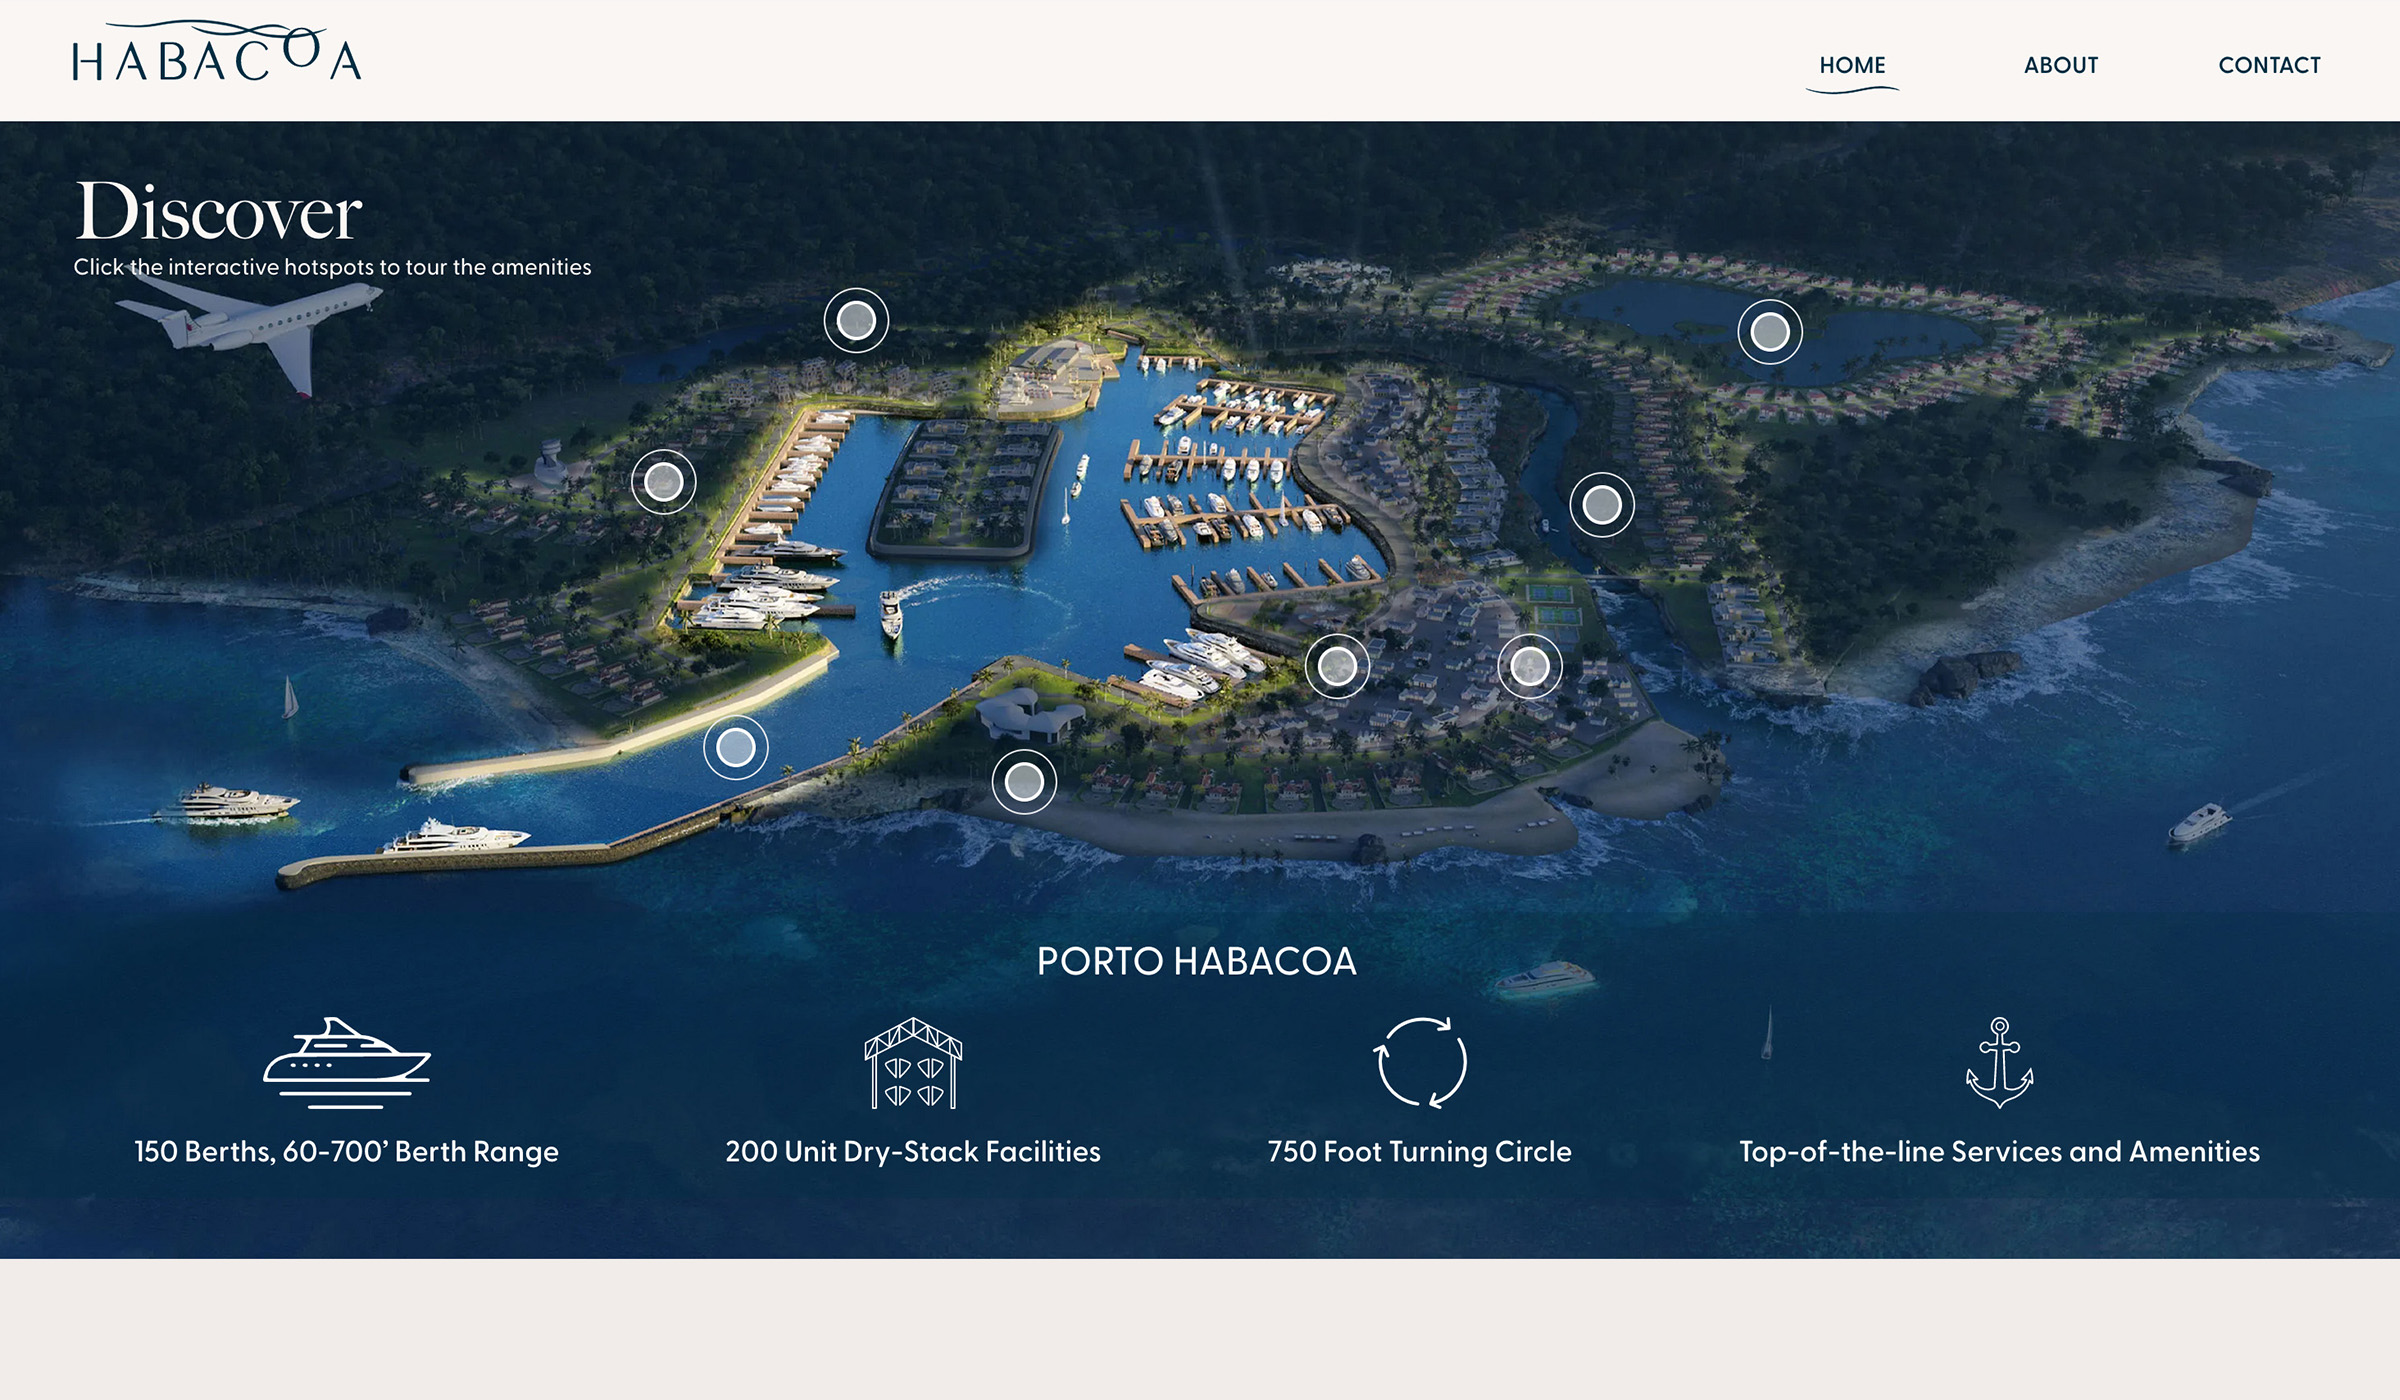 An interactive map with white hot spots highlighting areas of the super yacht marina.